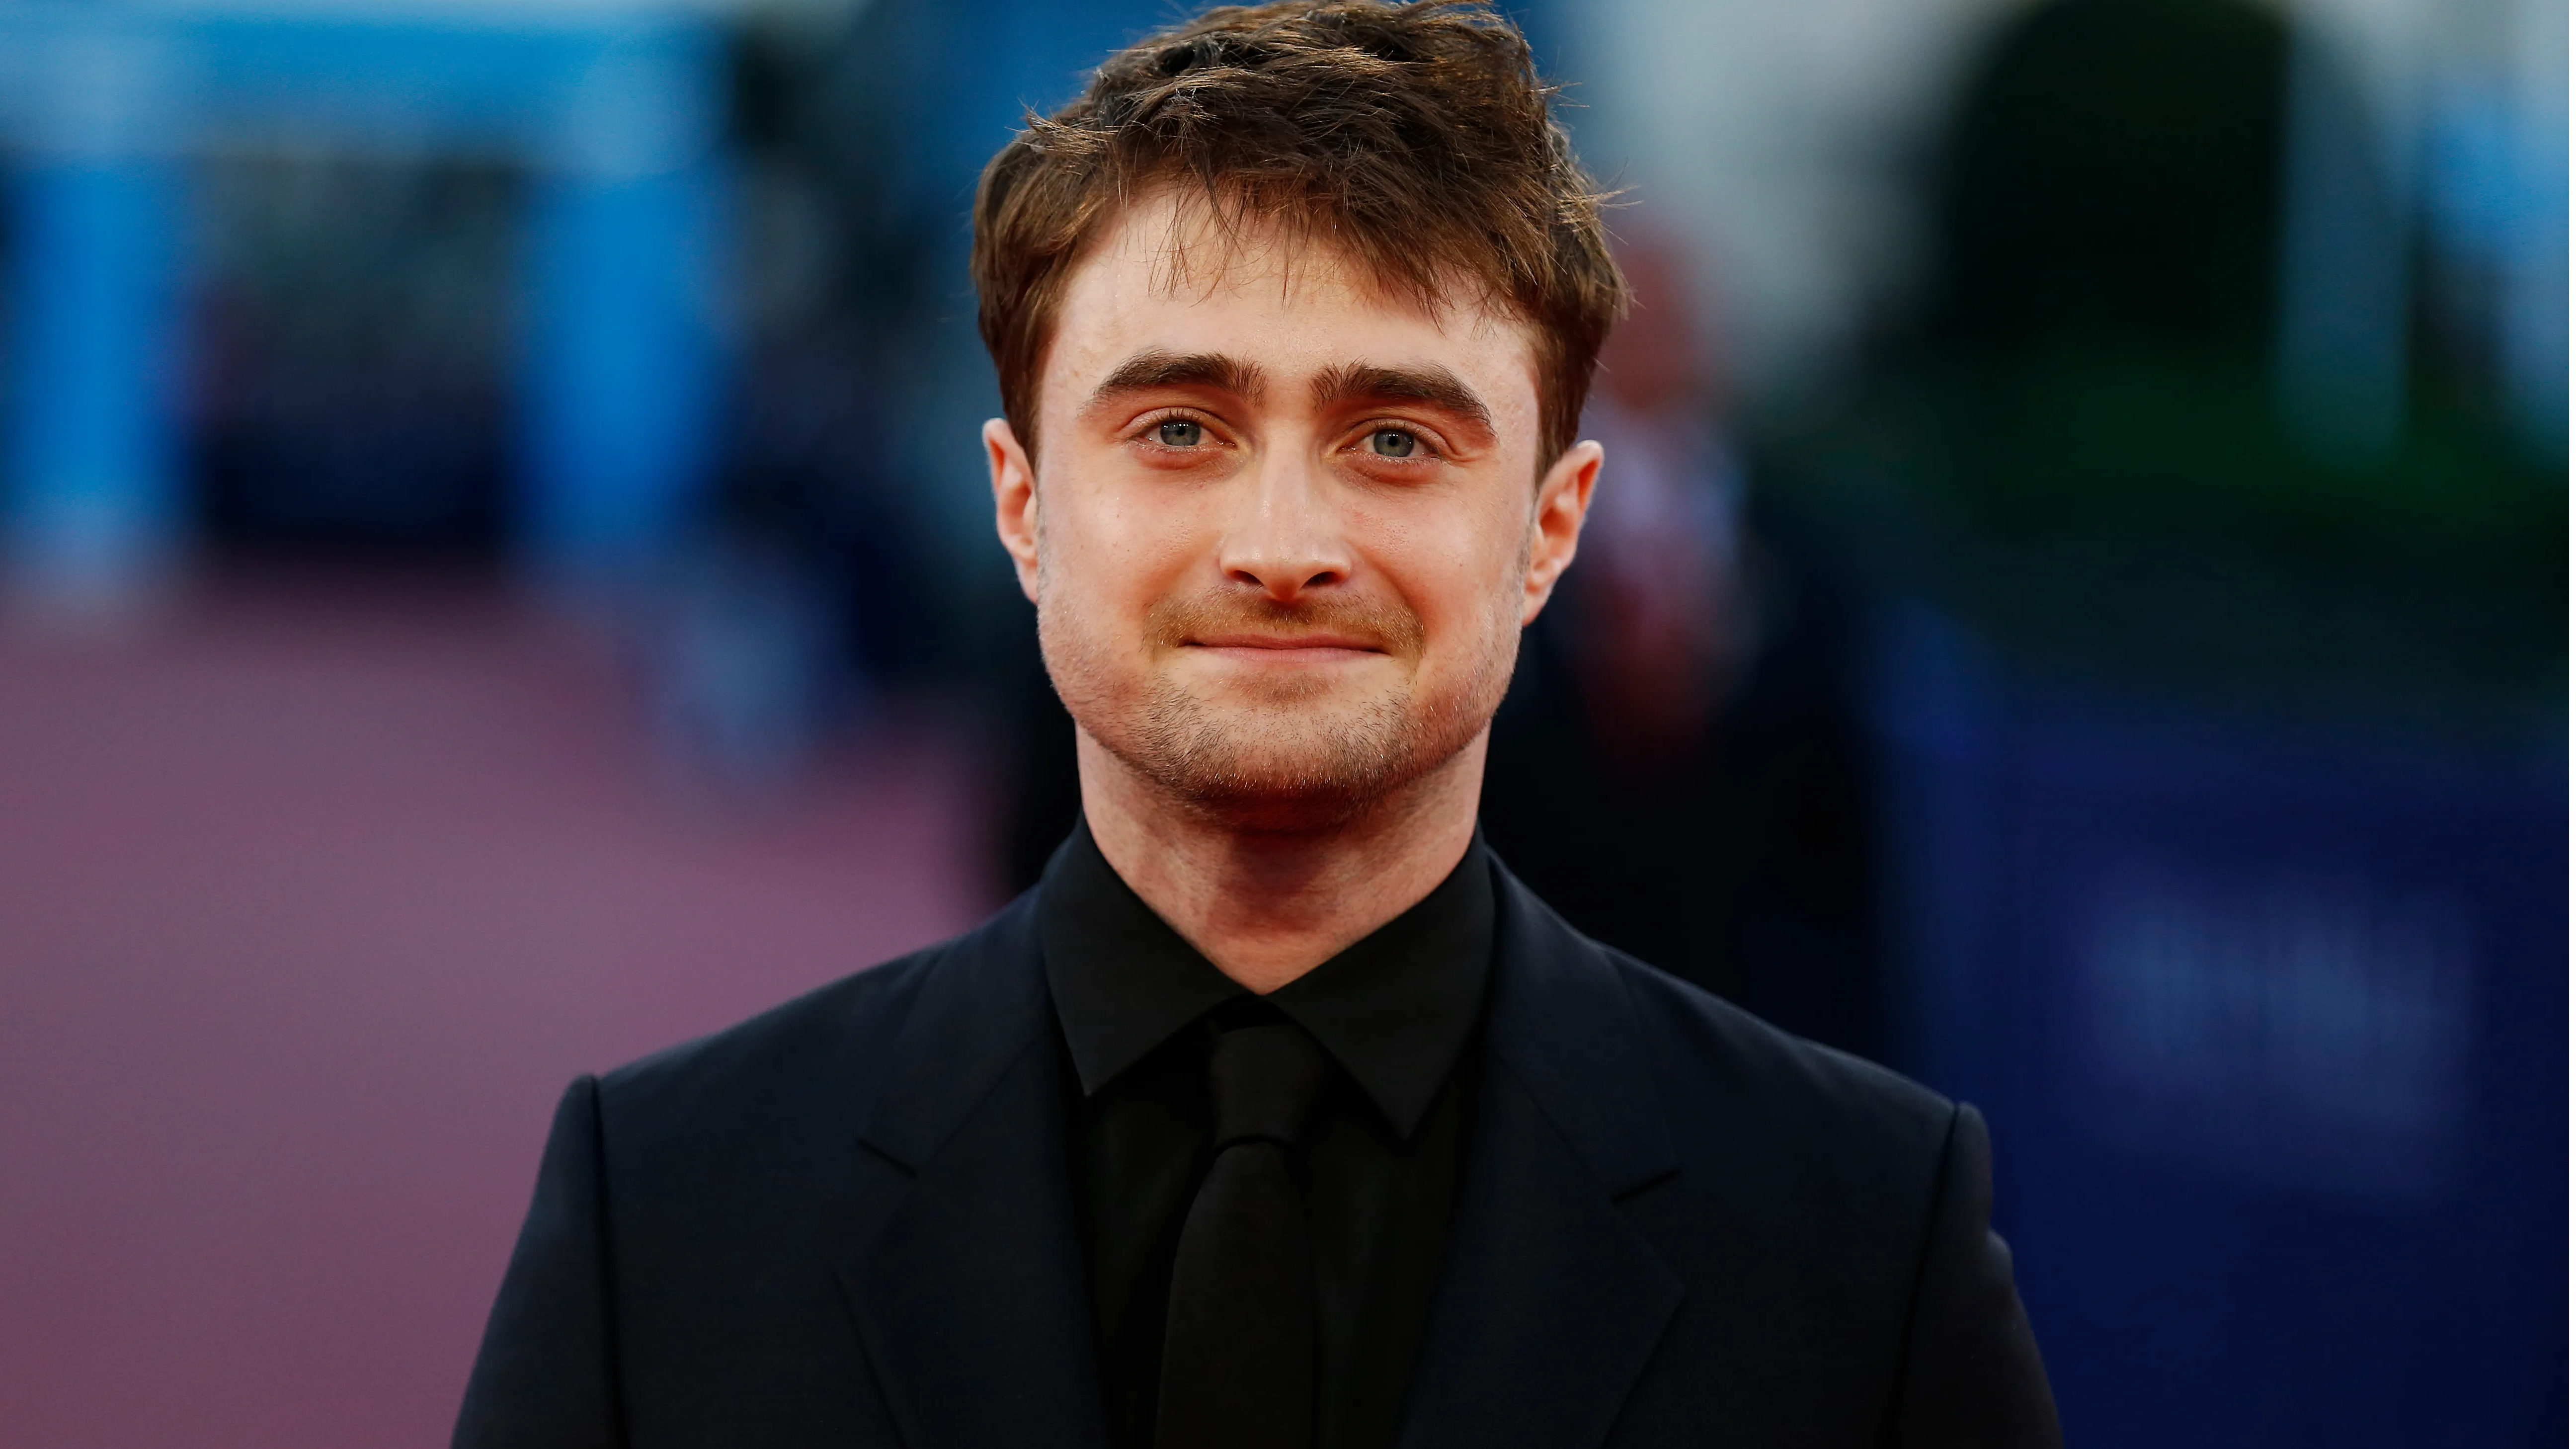 Daniel Radcliffe movies you can watch on his birthday that are not Harry Potter